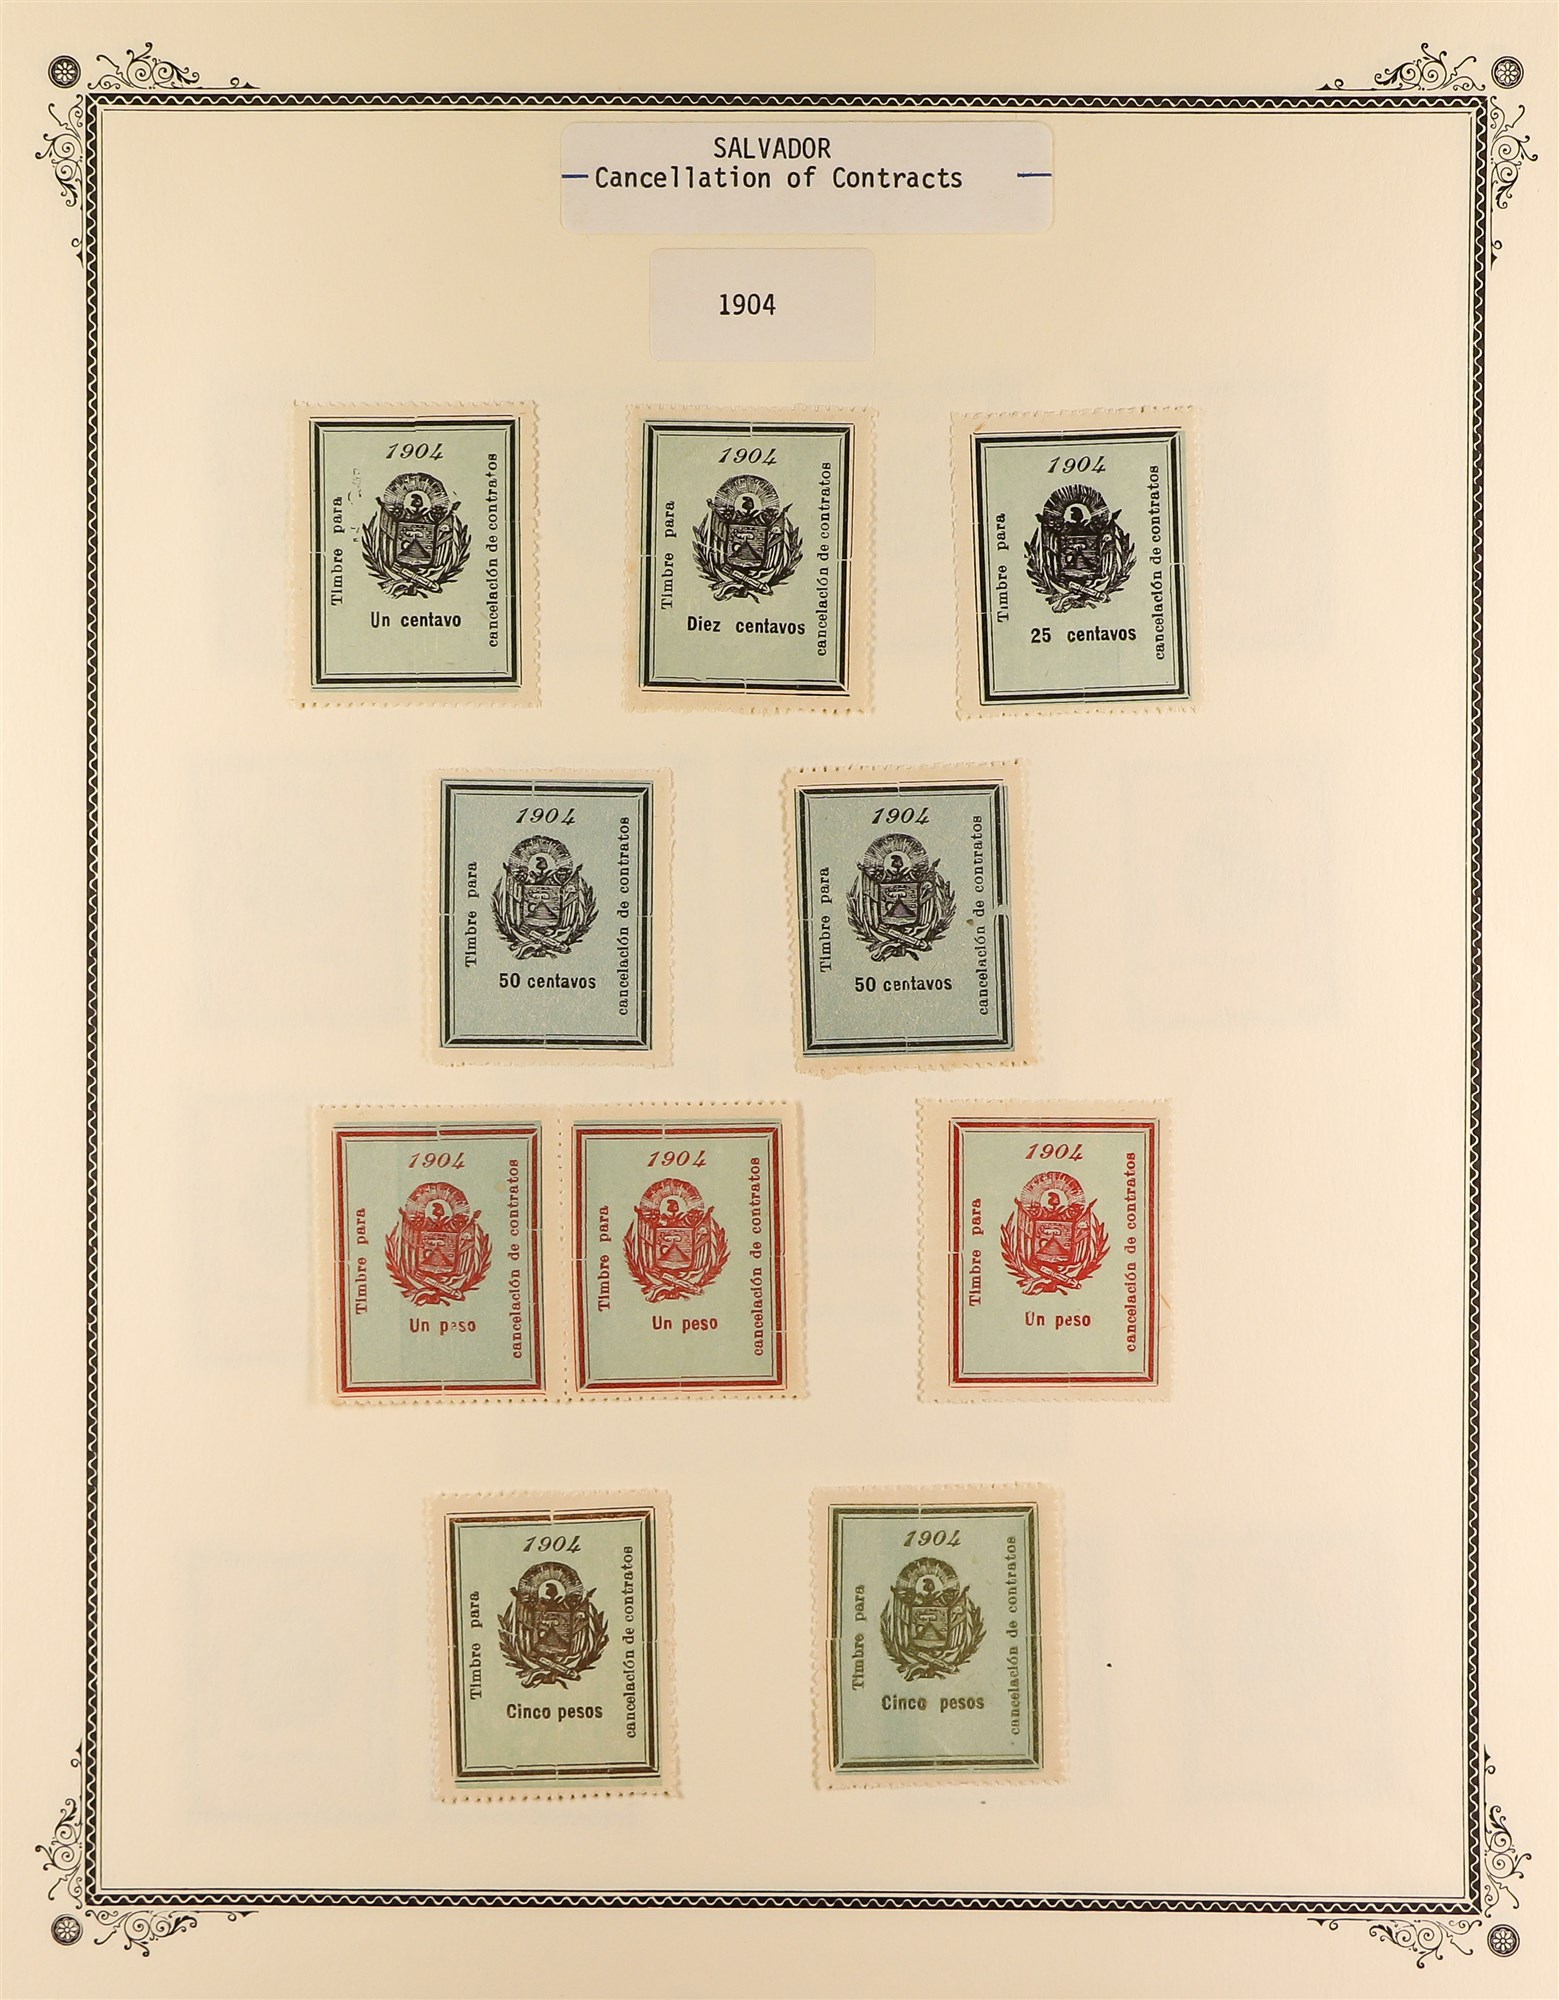 EL SALVADOR REVENUE STAMPS 1883 - 1925 mint & used collection of over 400 revenue stamps, on album - Image 2 of 27